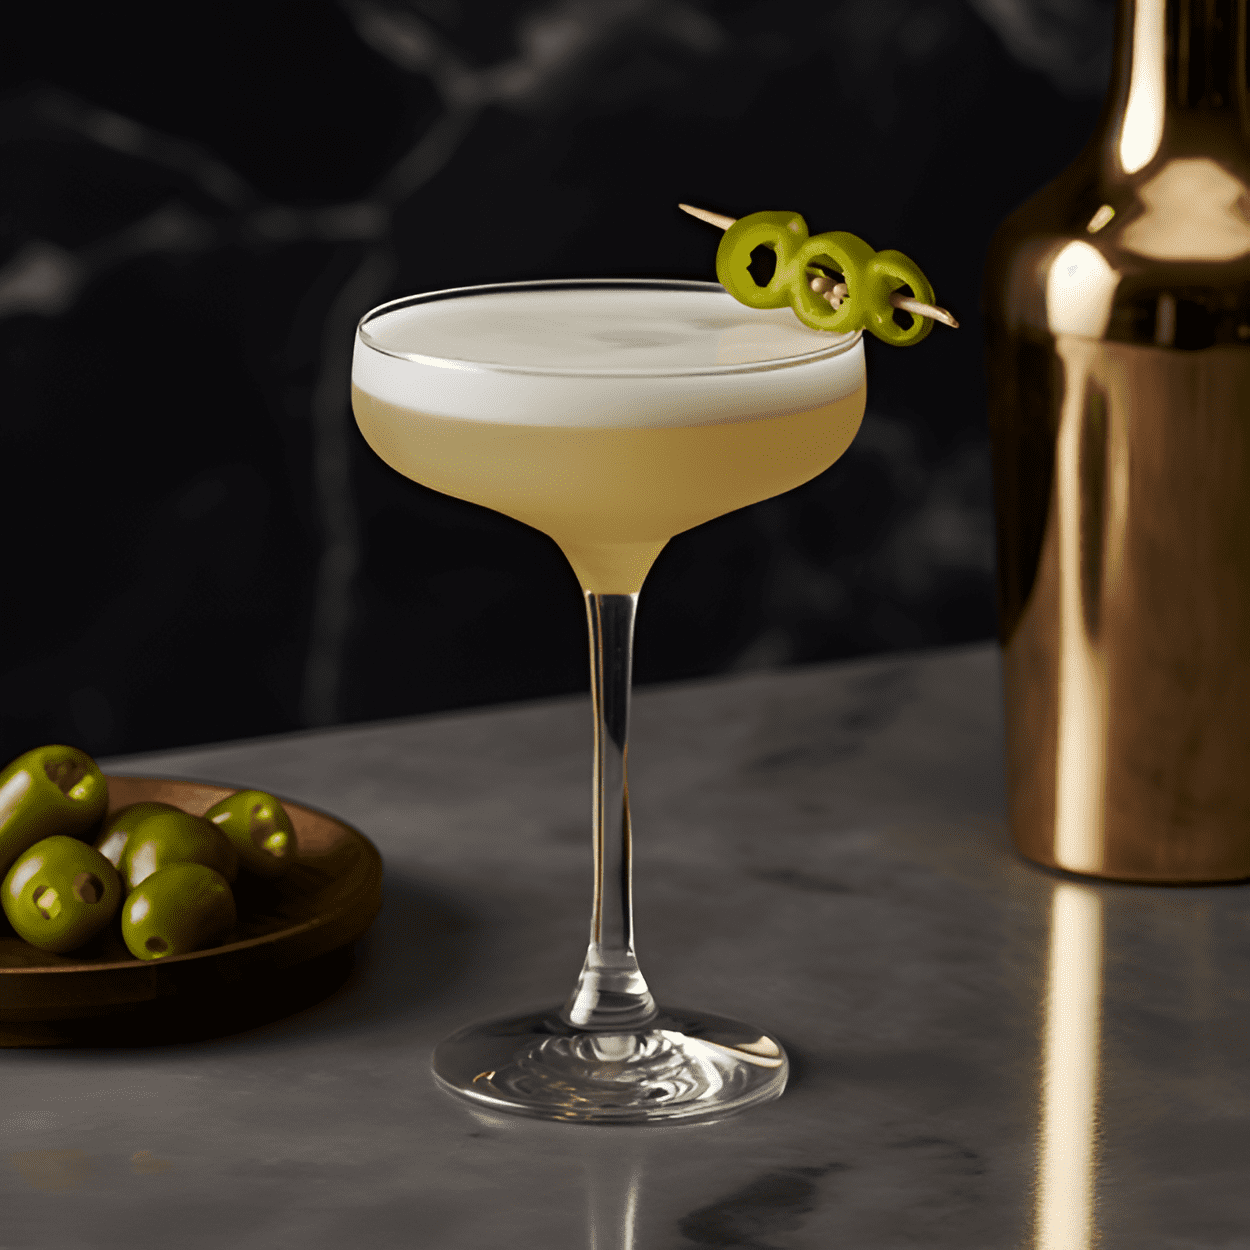 Caresha Please Cocktail Recipe - The Caresha Please is a cocktail with a spicy kick. It has a strong, robust flavor with a hint of sweetness. The heat from the jalapeno is balanced by the sweetness of the pineapple juice, making it a well-rounded cocktail.